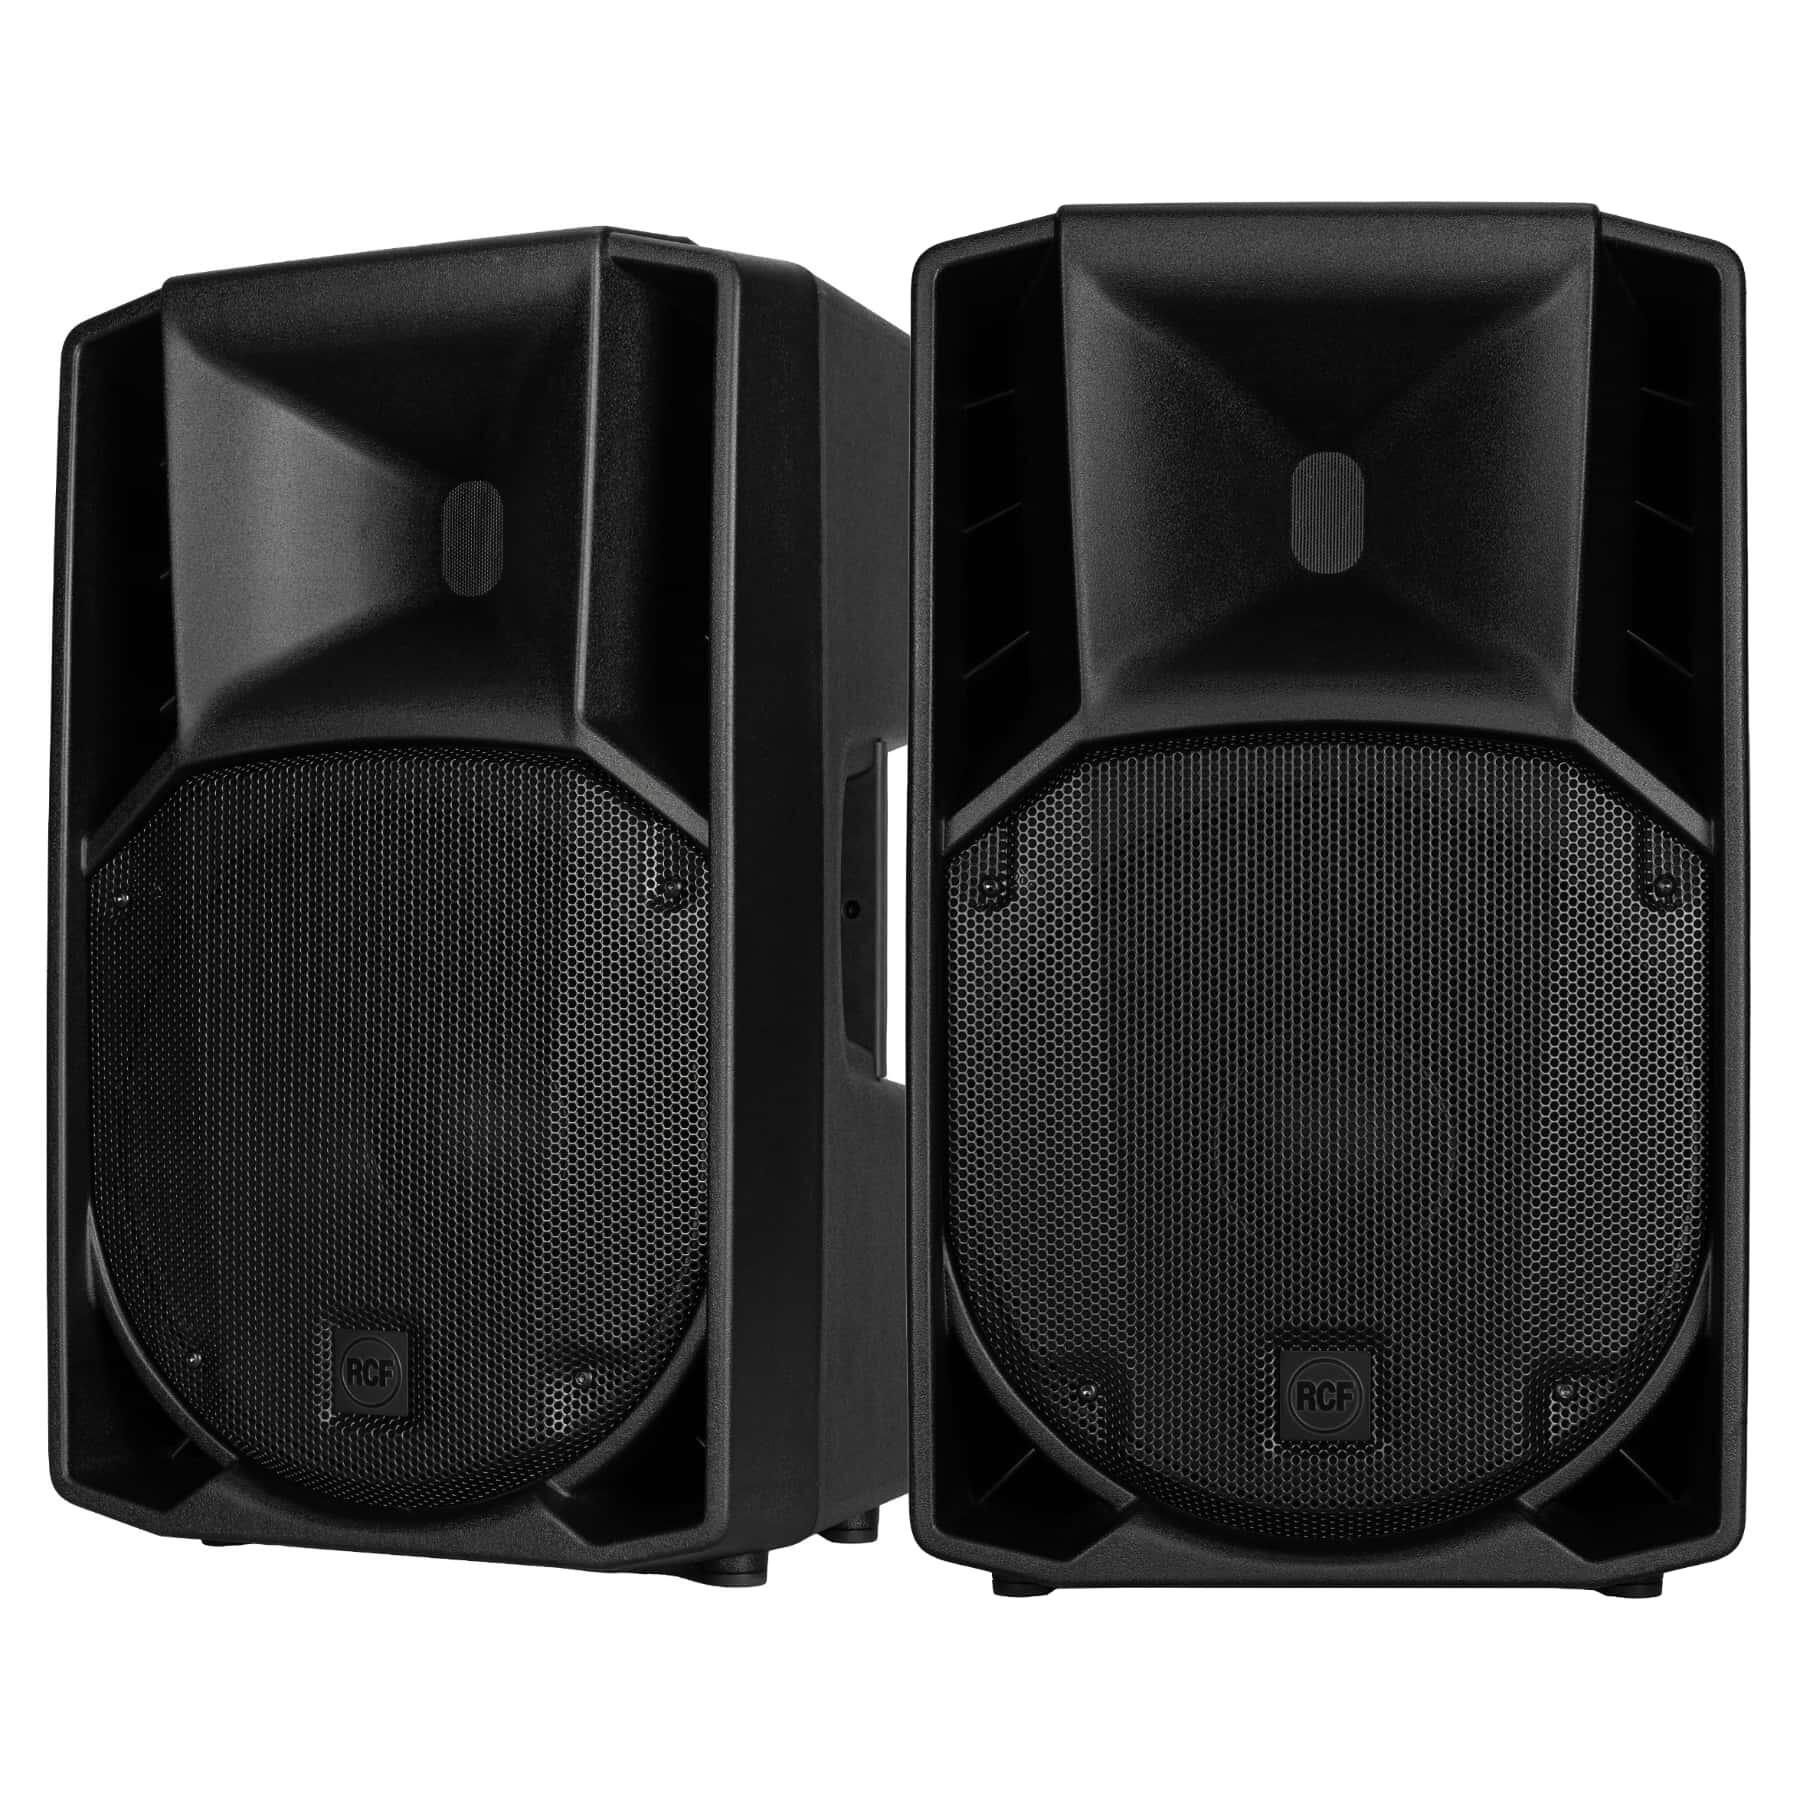 RCF ART 712-A MK5 Active Two-Way Speaker Pair